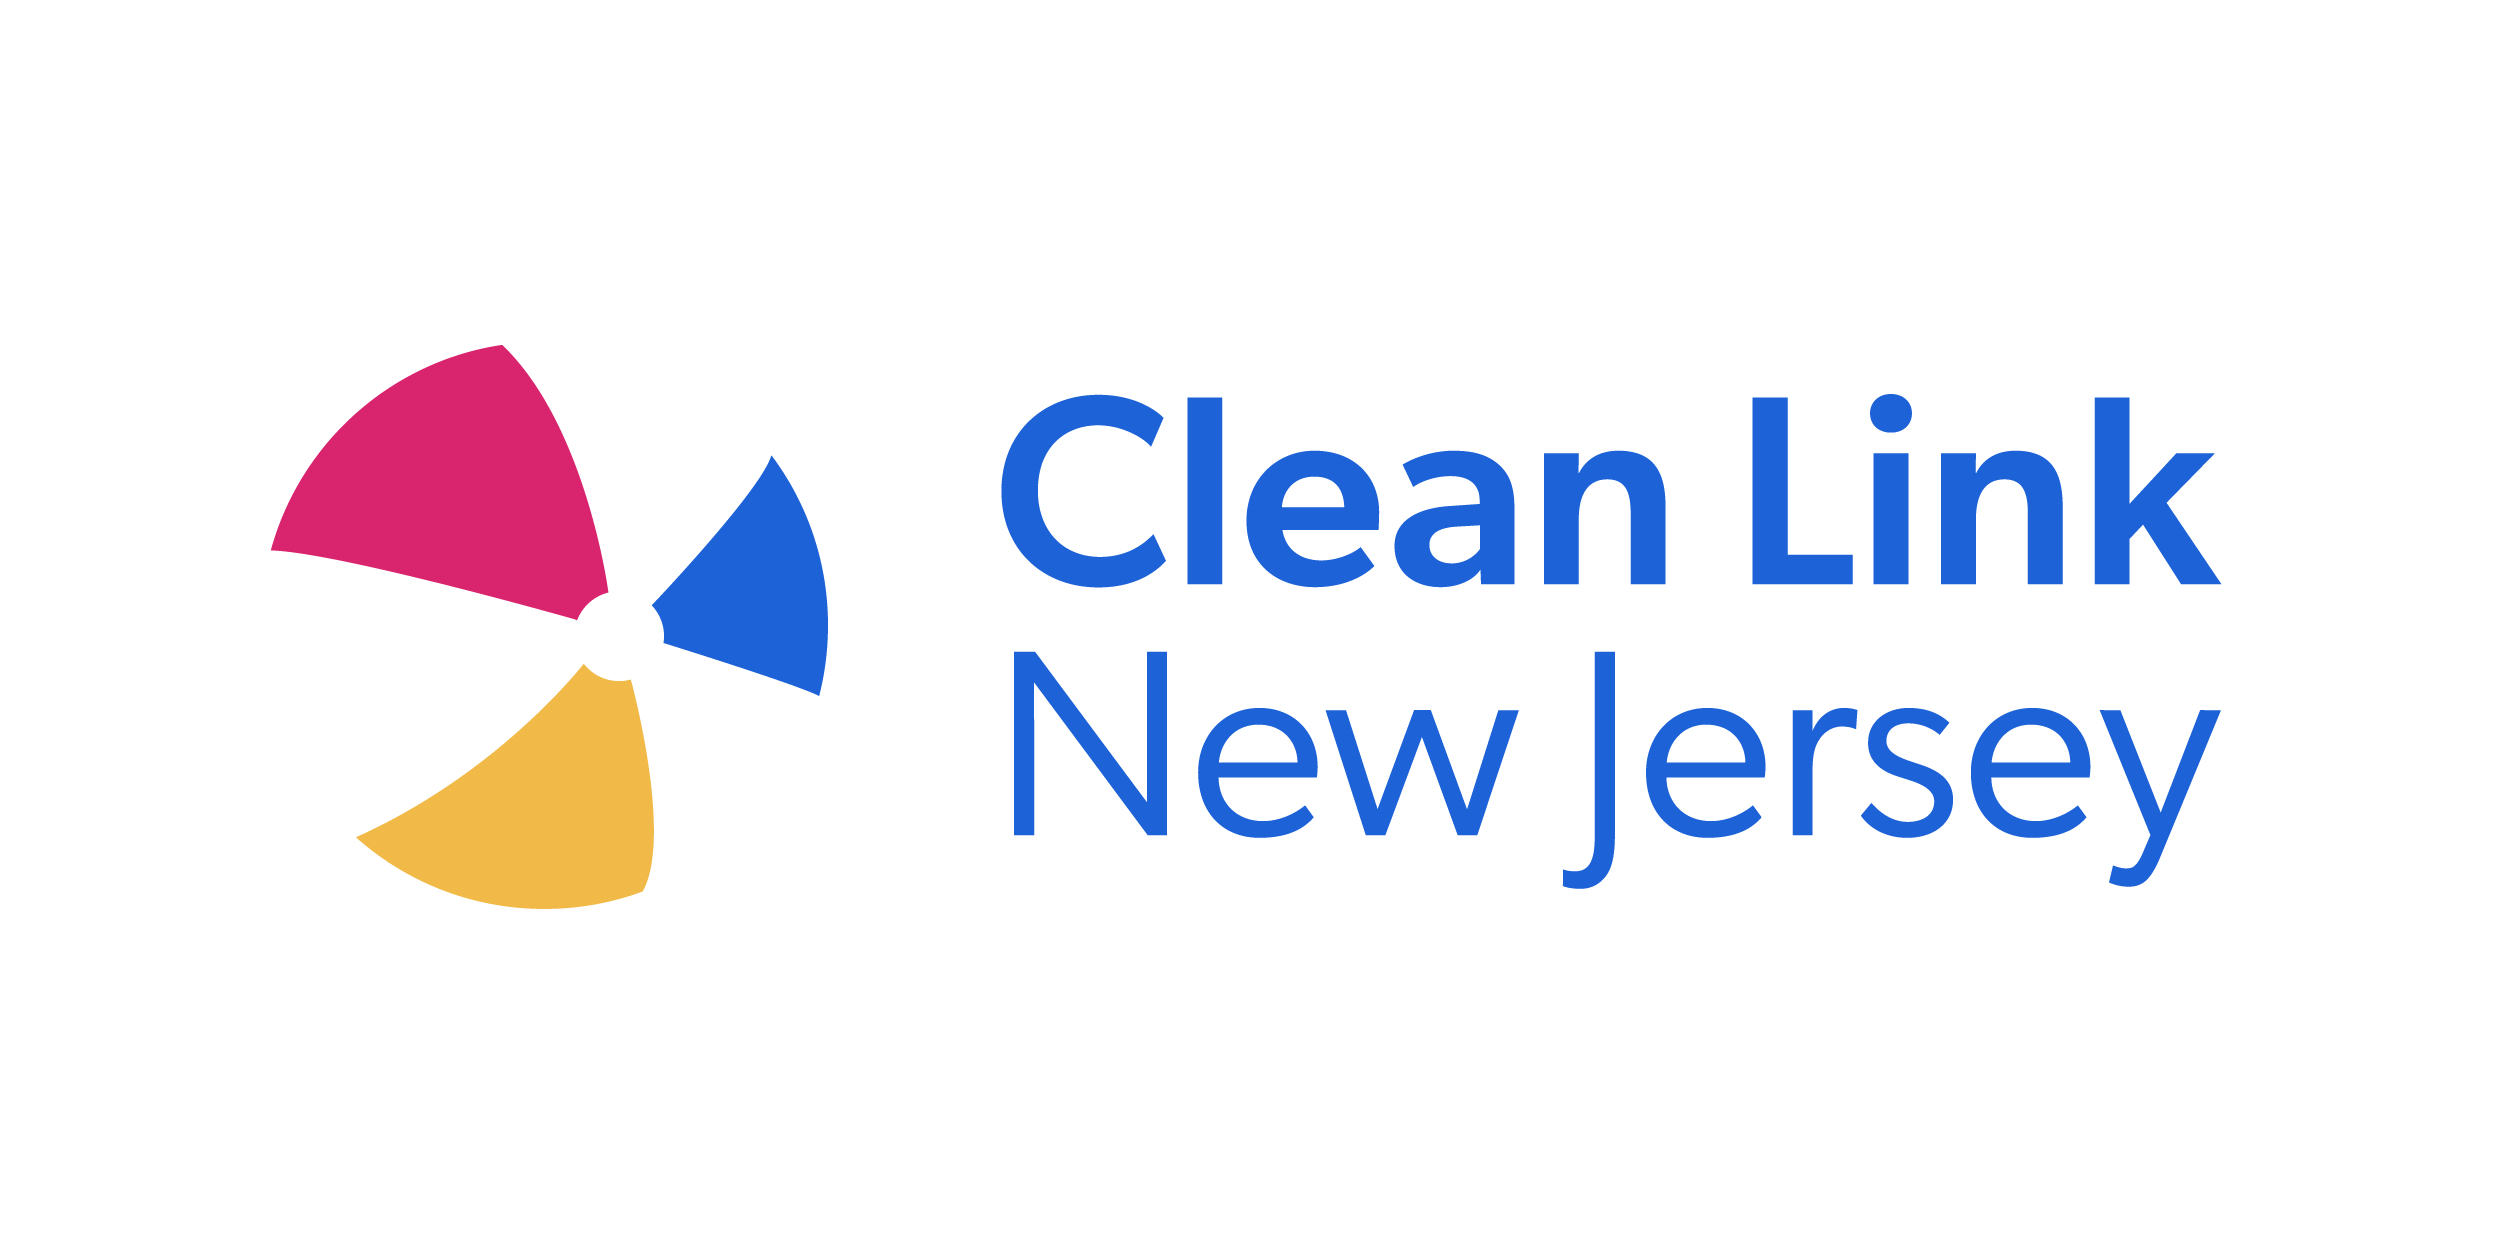 The Clean Link New Jersey logo.